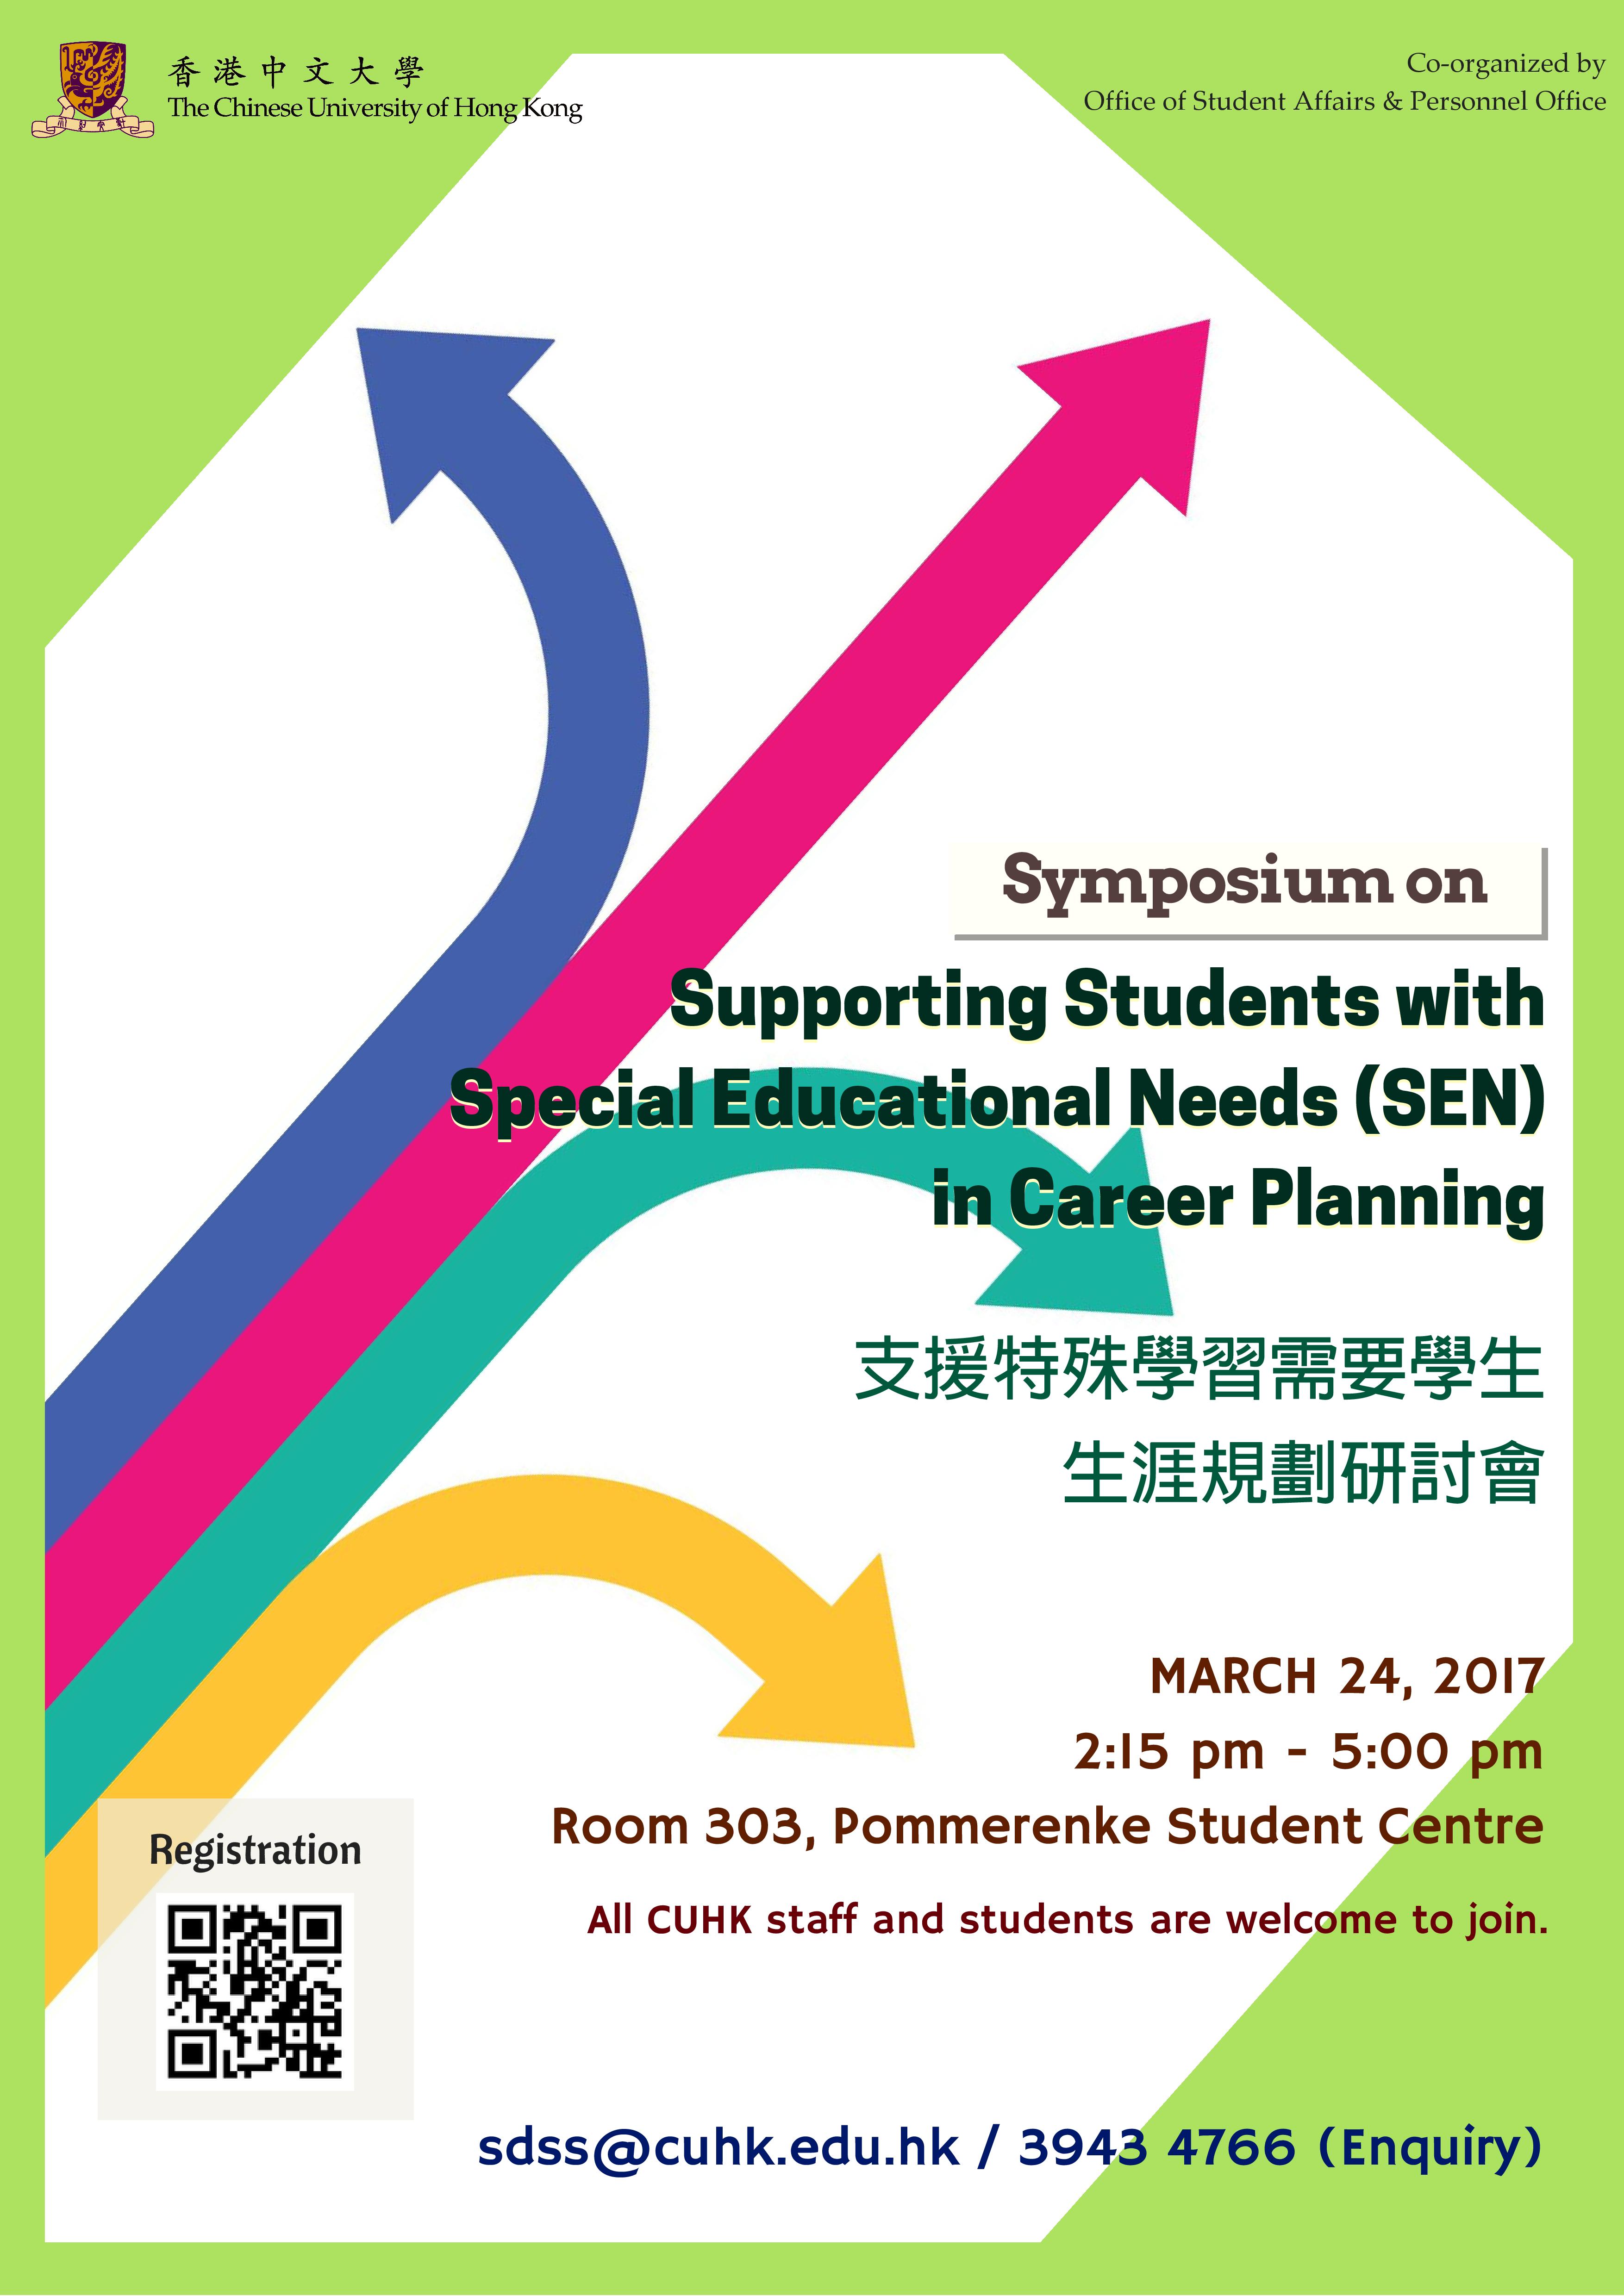 Symposium on Supporting Students with SEN in Career Planning